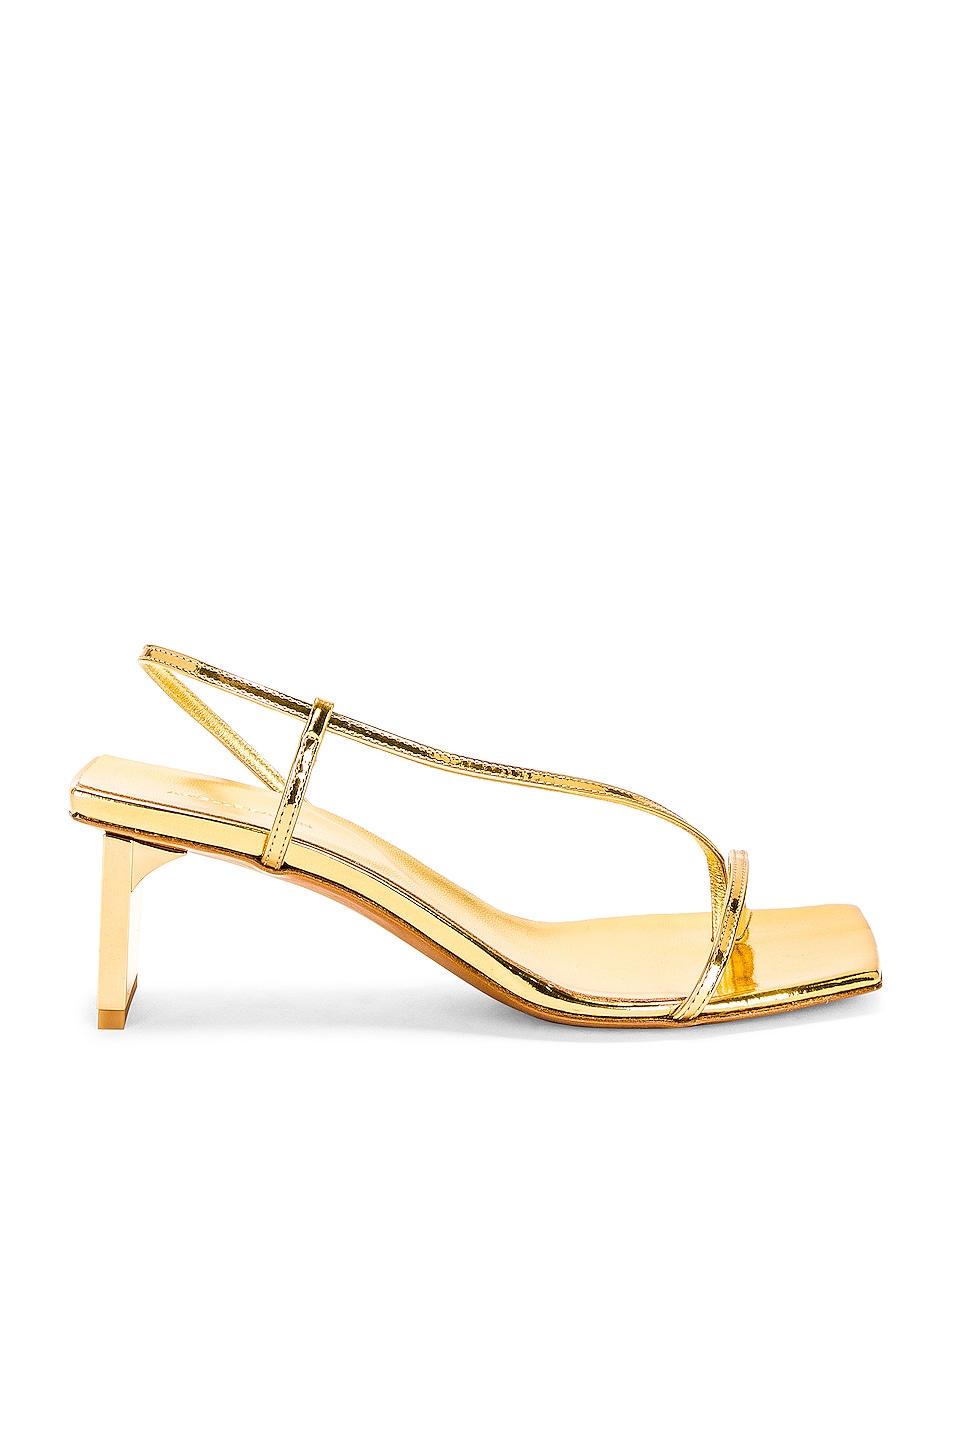 Image 1 of Arielle Baron Narcissus 55 Heel in Gold Metallic